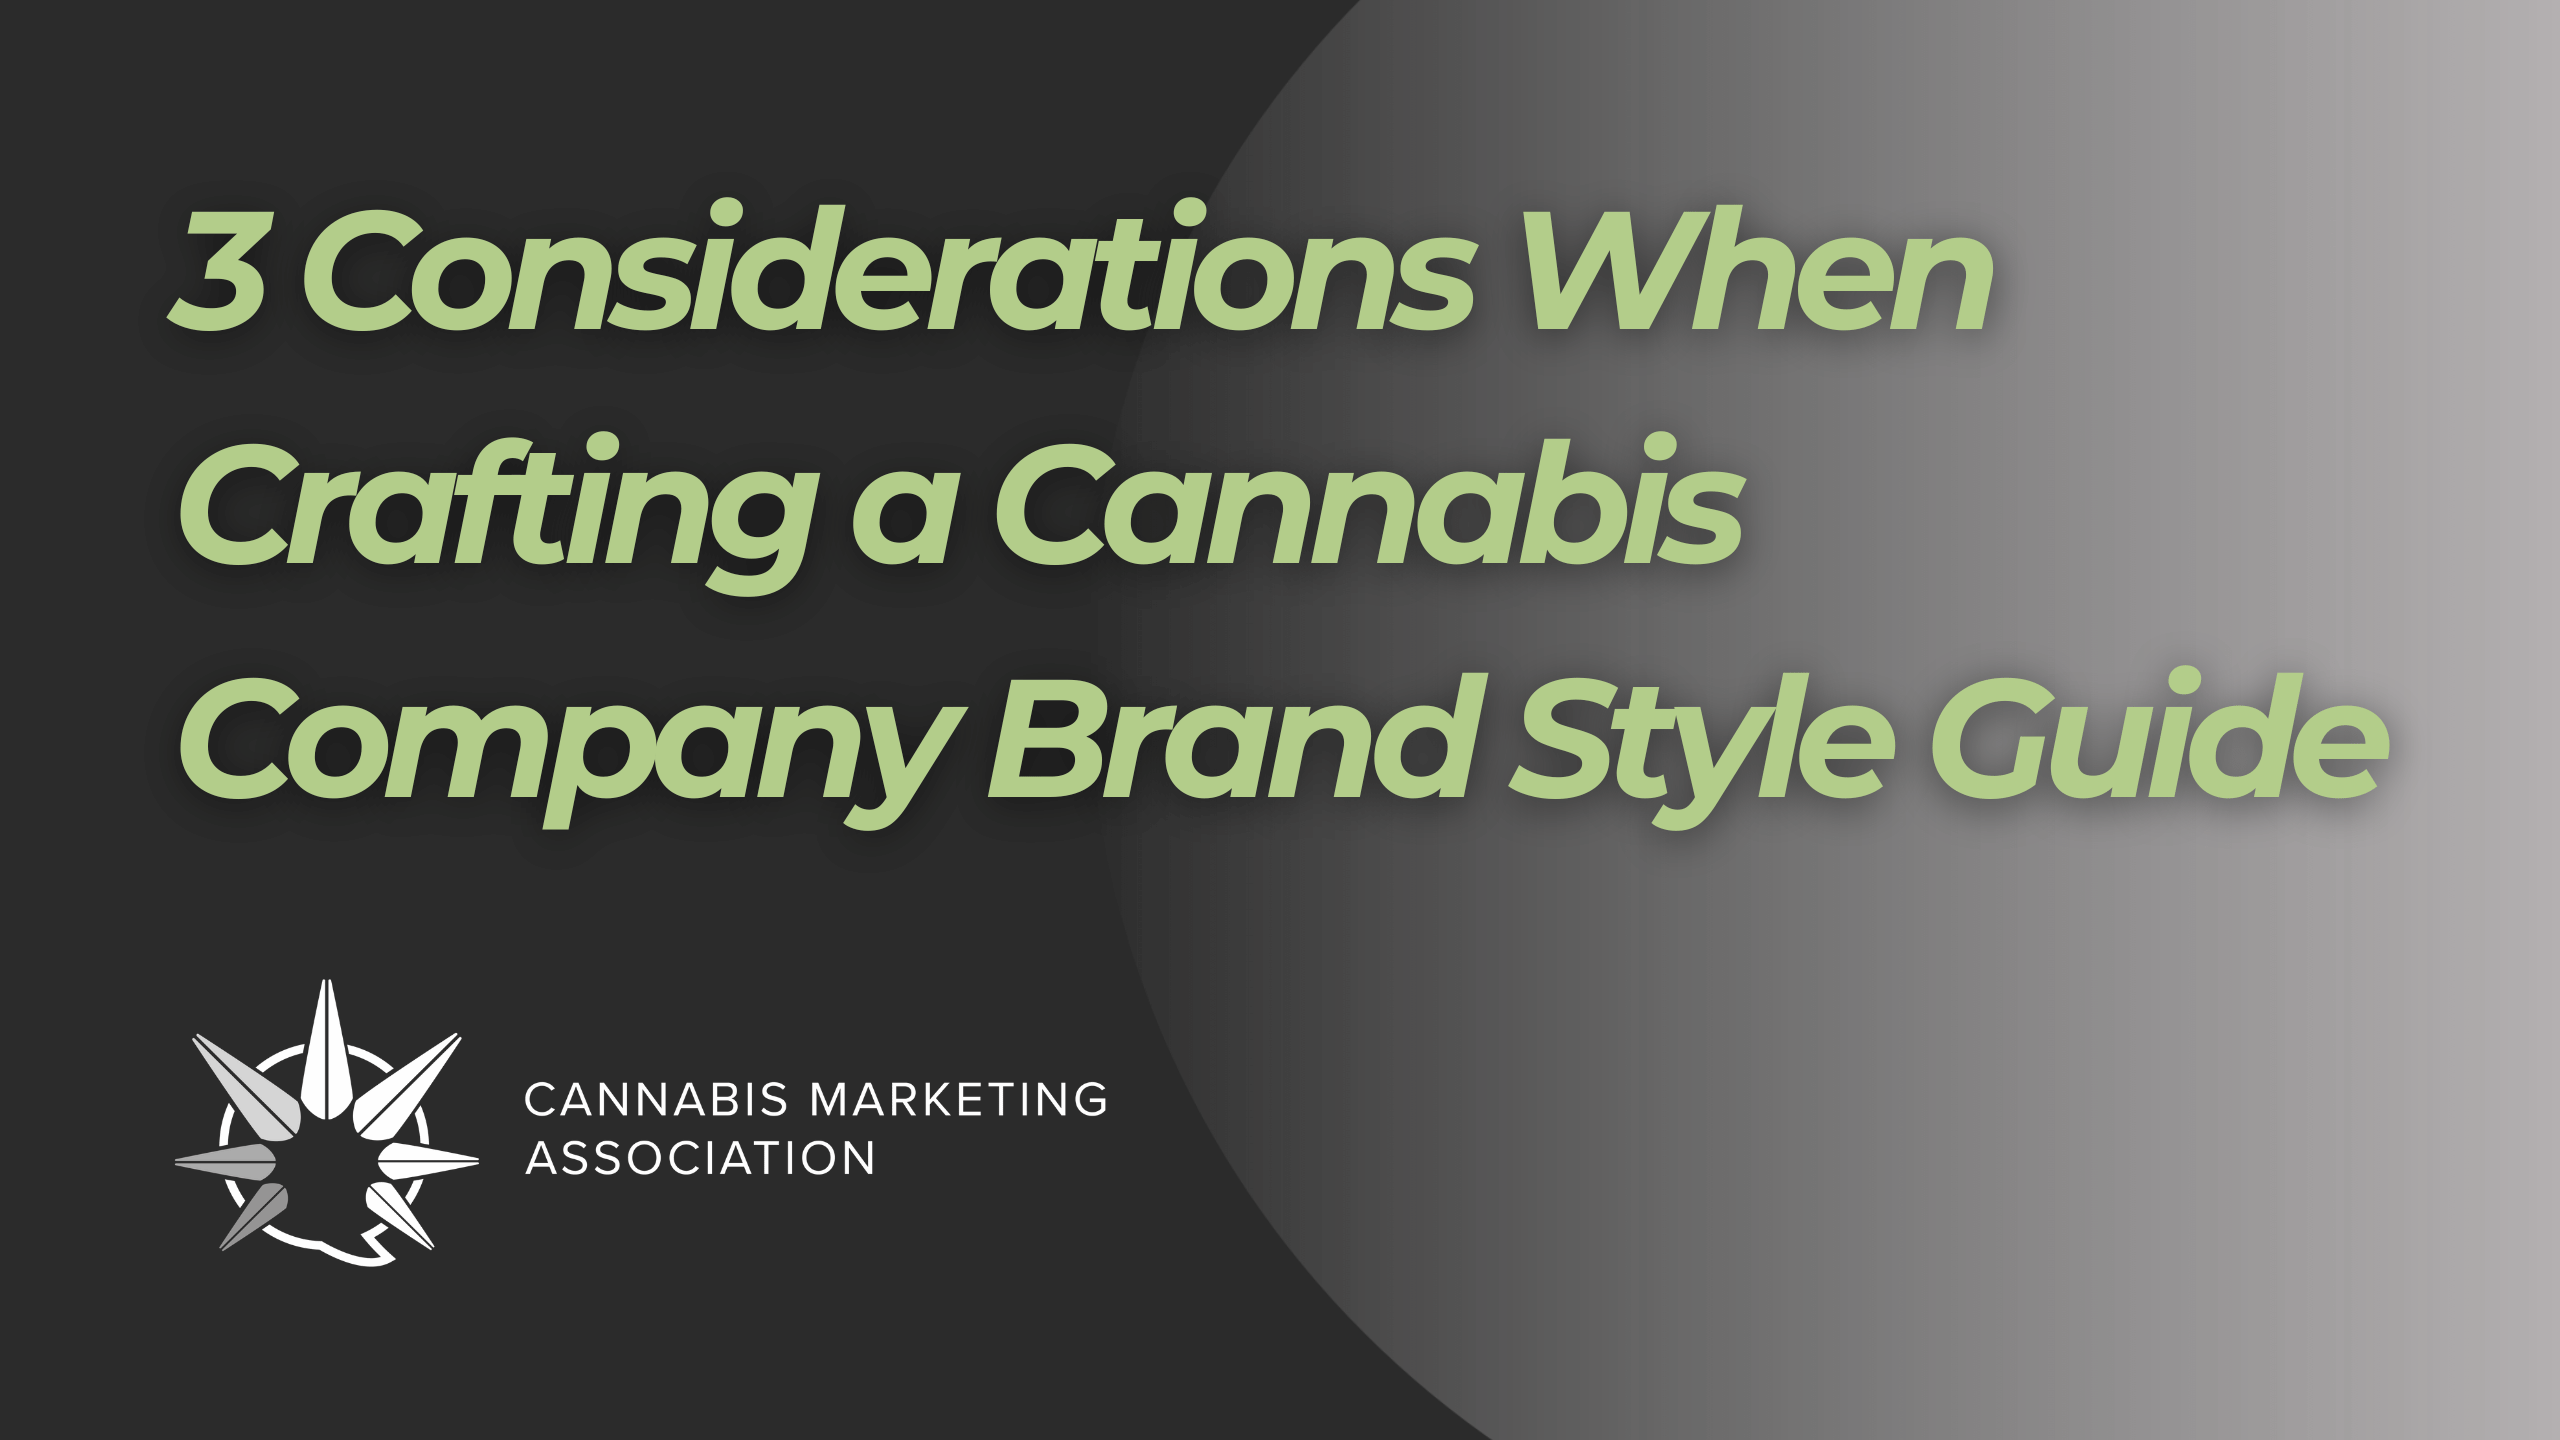 3 Considerations When Crafting a Cannabis Company Brand Style Guide